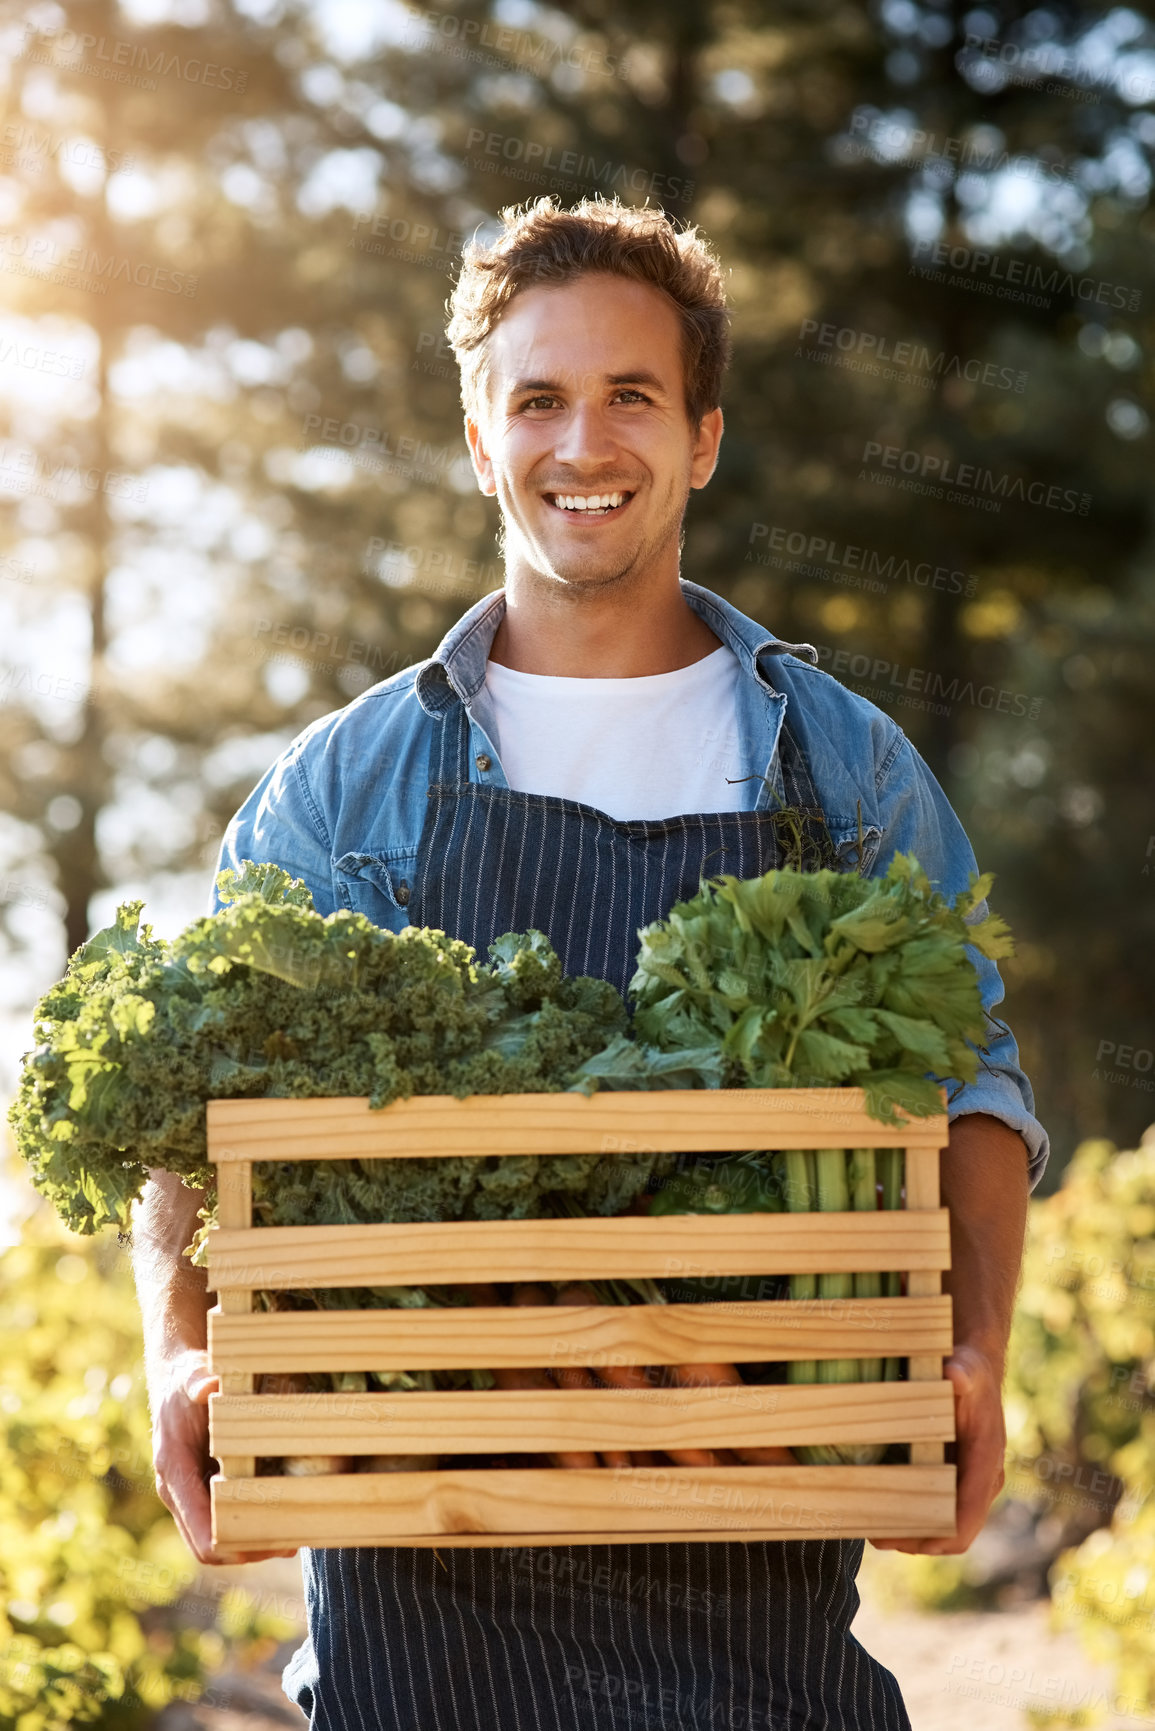 Buy stock photo Shot of a young man holding a crate full of freshly picked produce on a farm